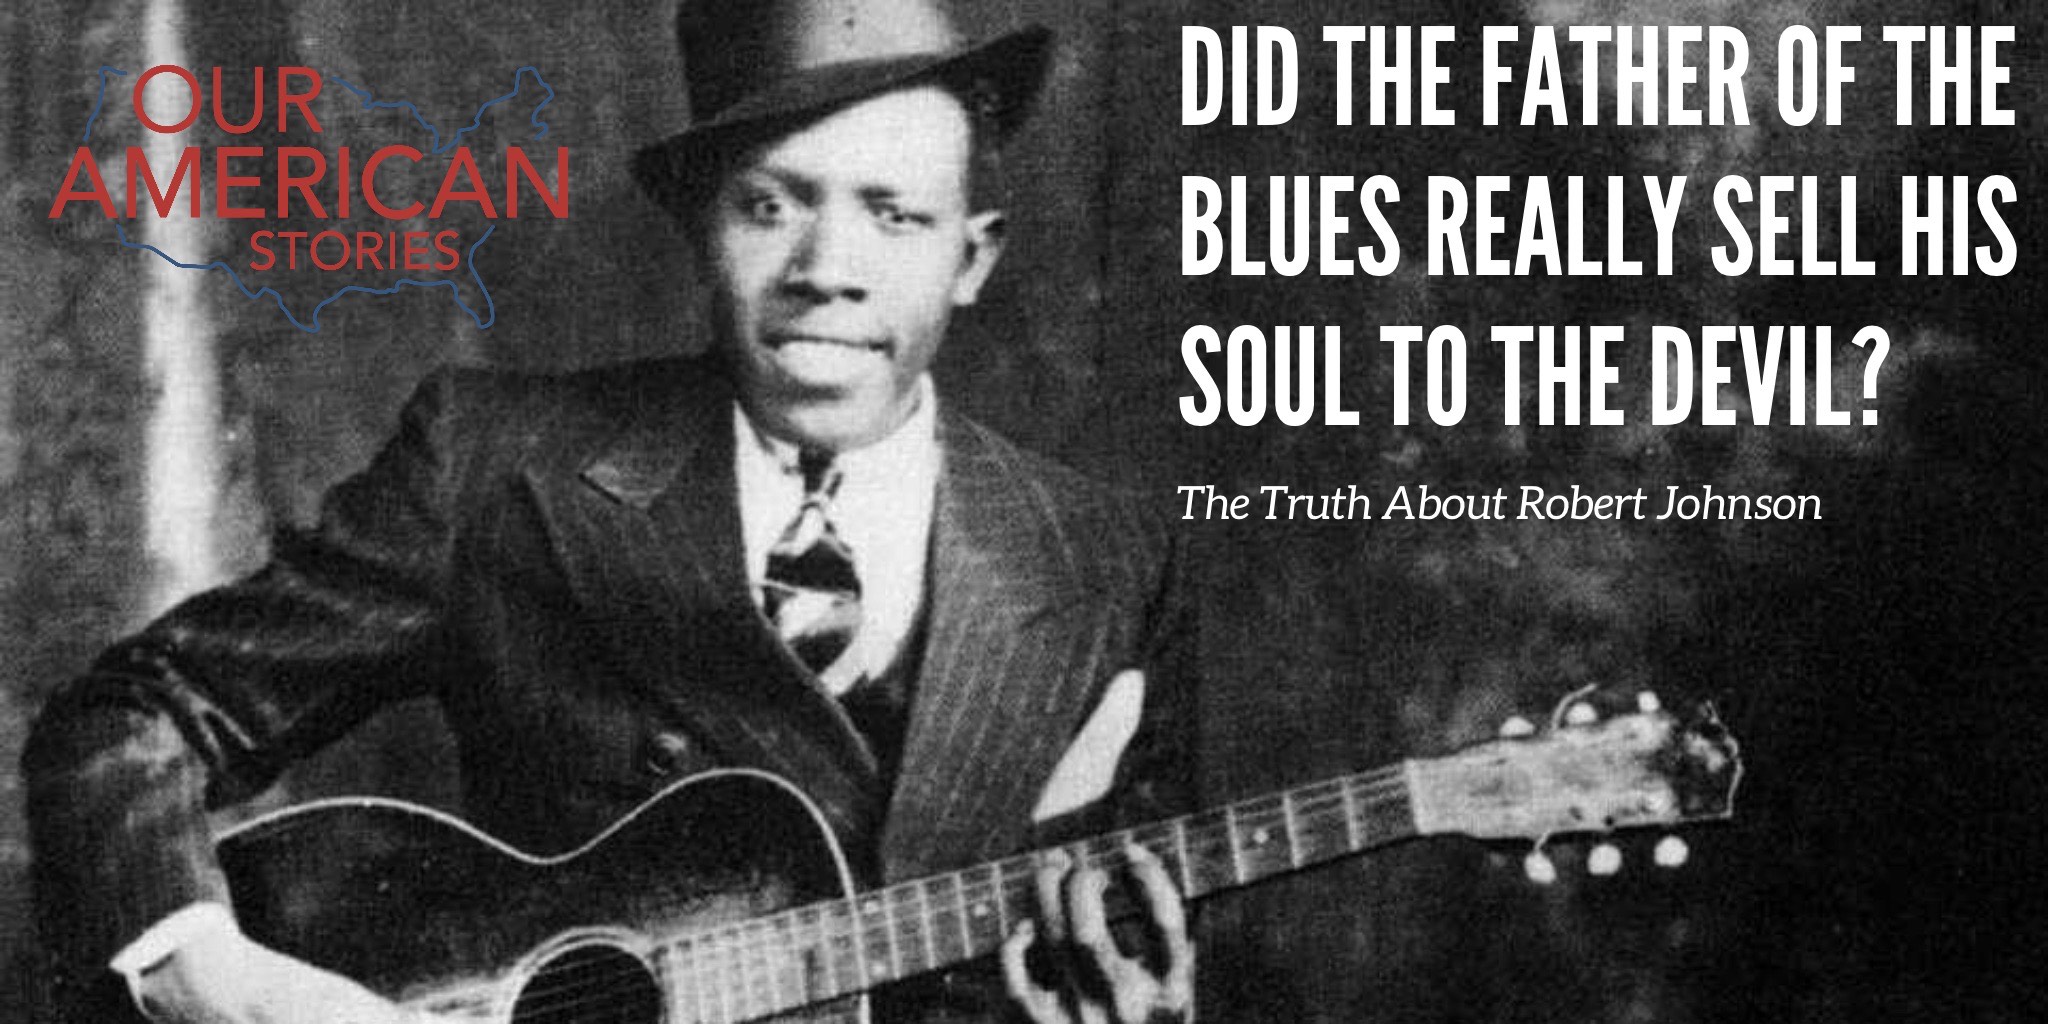 Did The Father of The Blues Really Sell His Soul to The Devil?